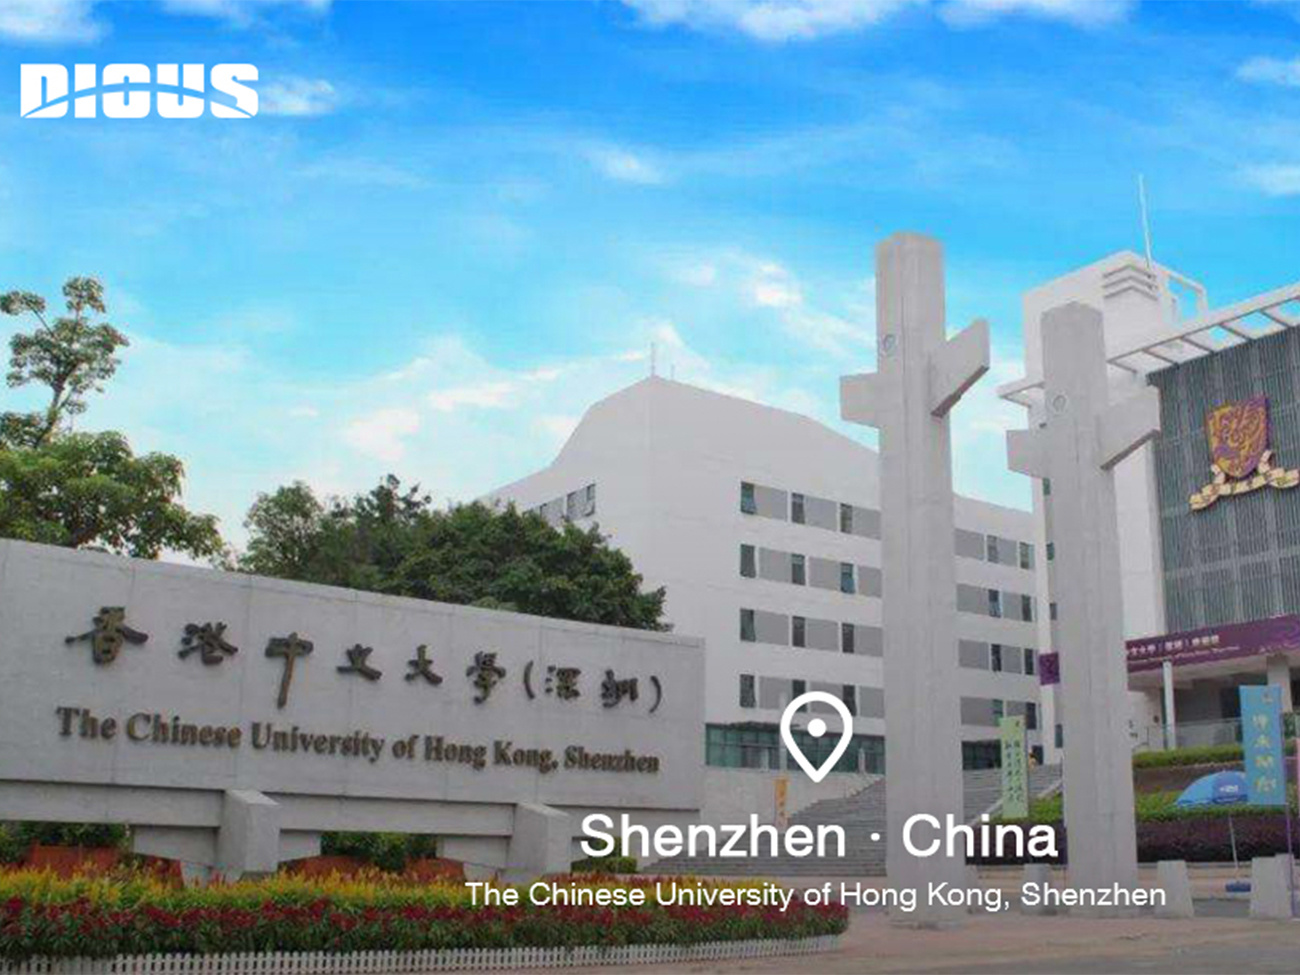 The Chinese University of Hong Kong outlooking